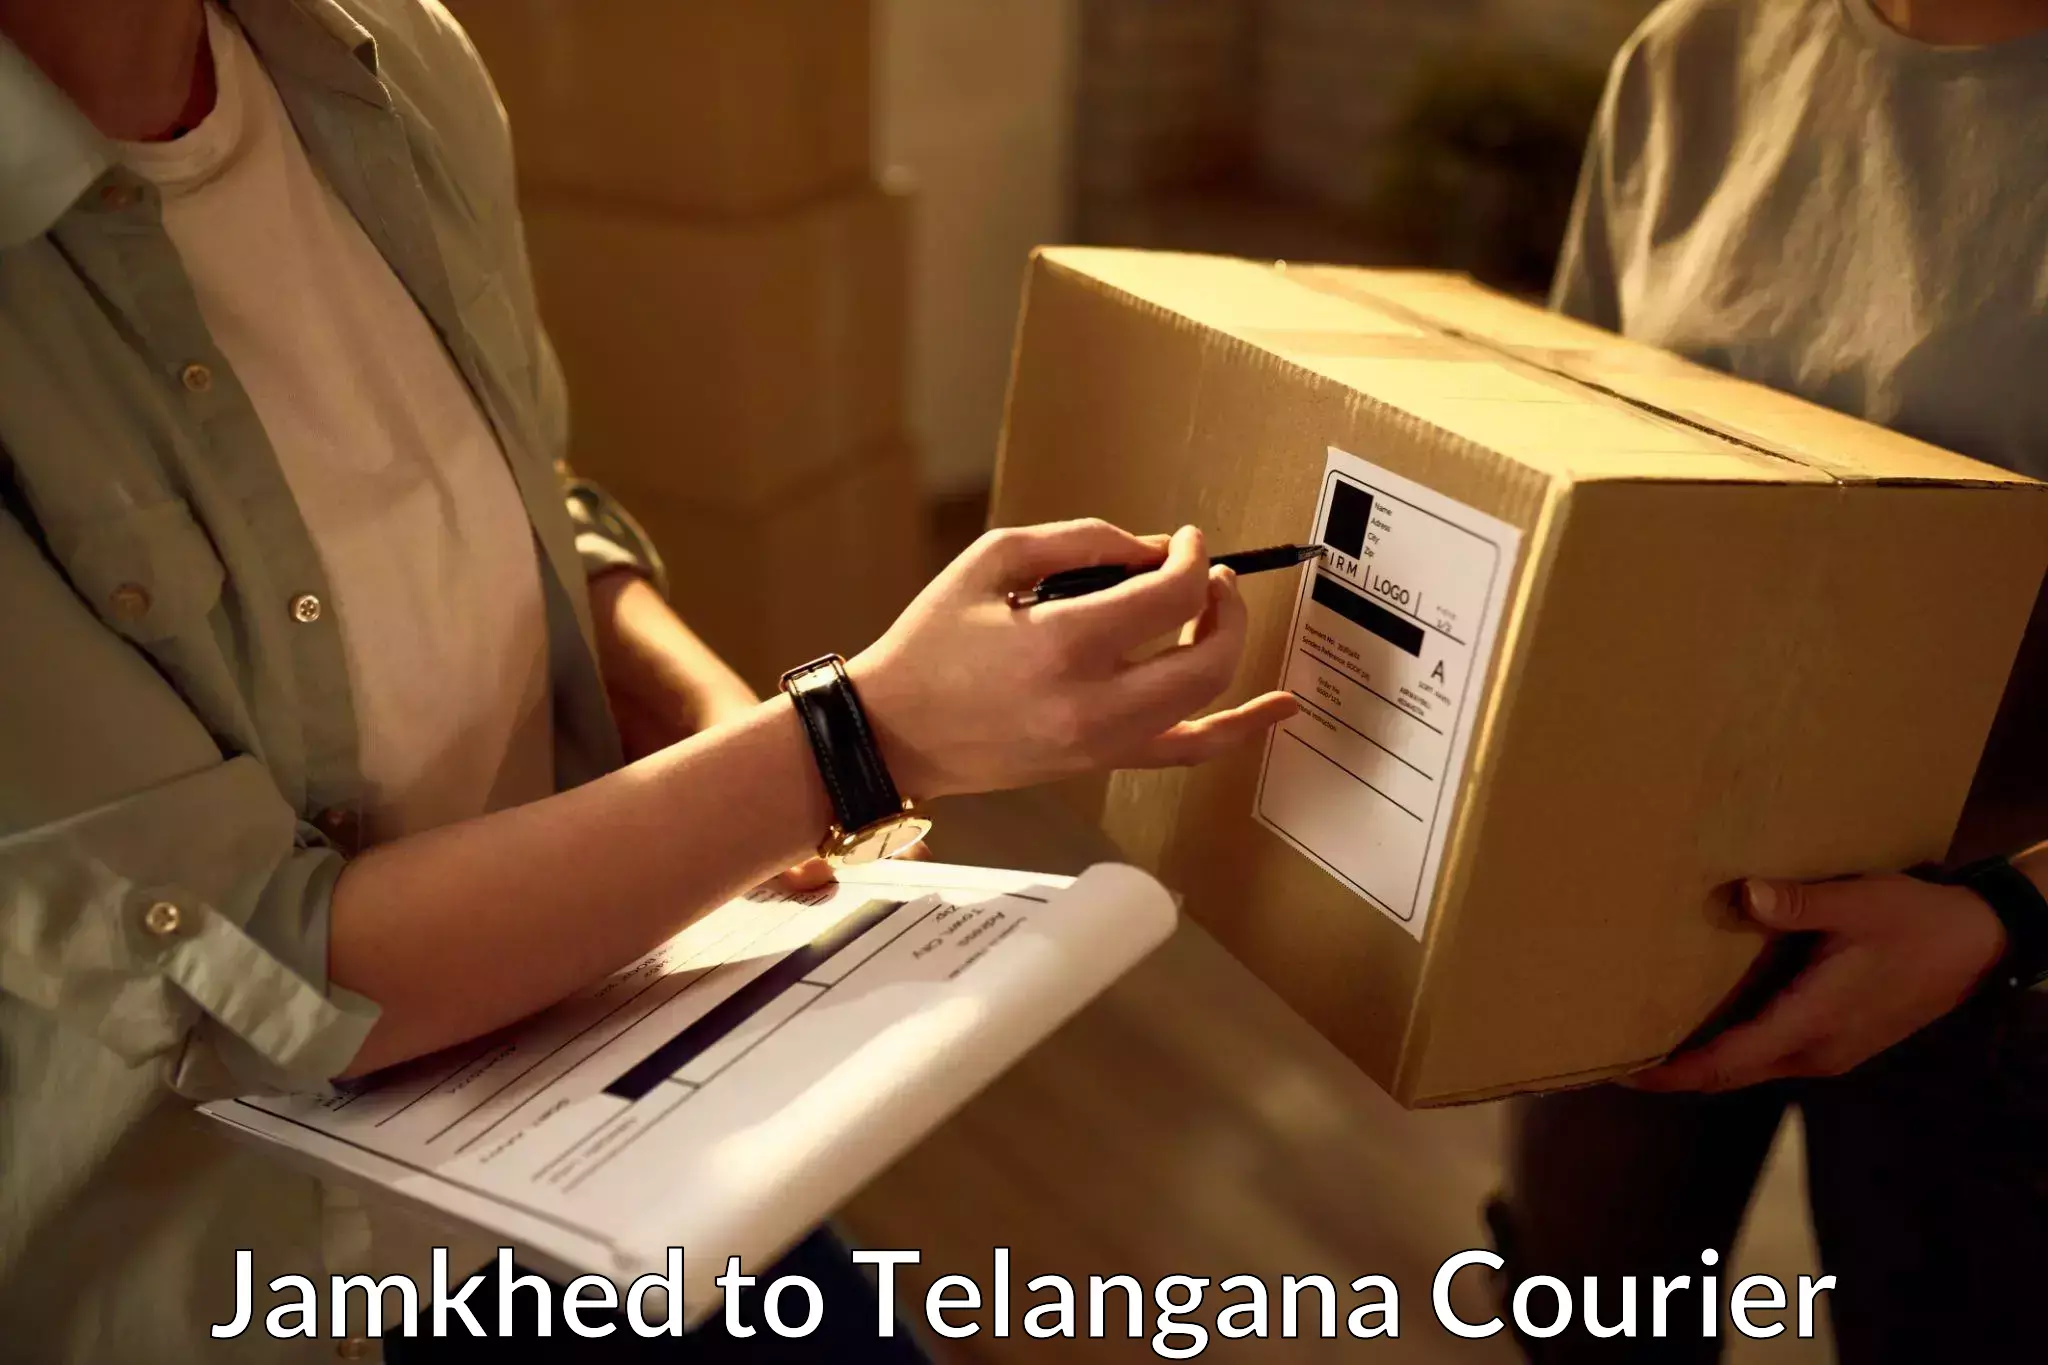 User-friendly courier app Jamkhed to Telangana